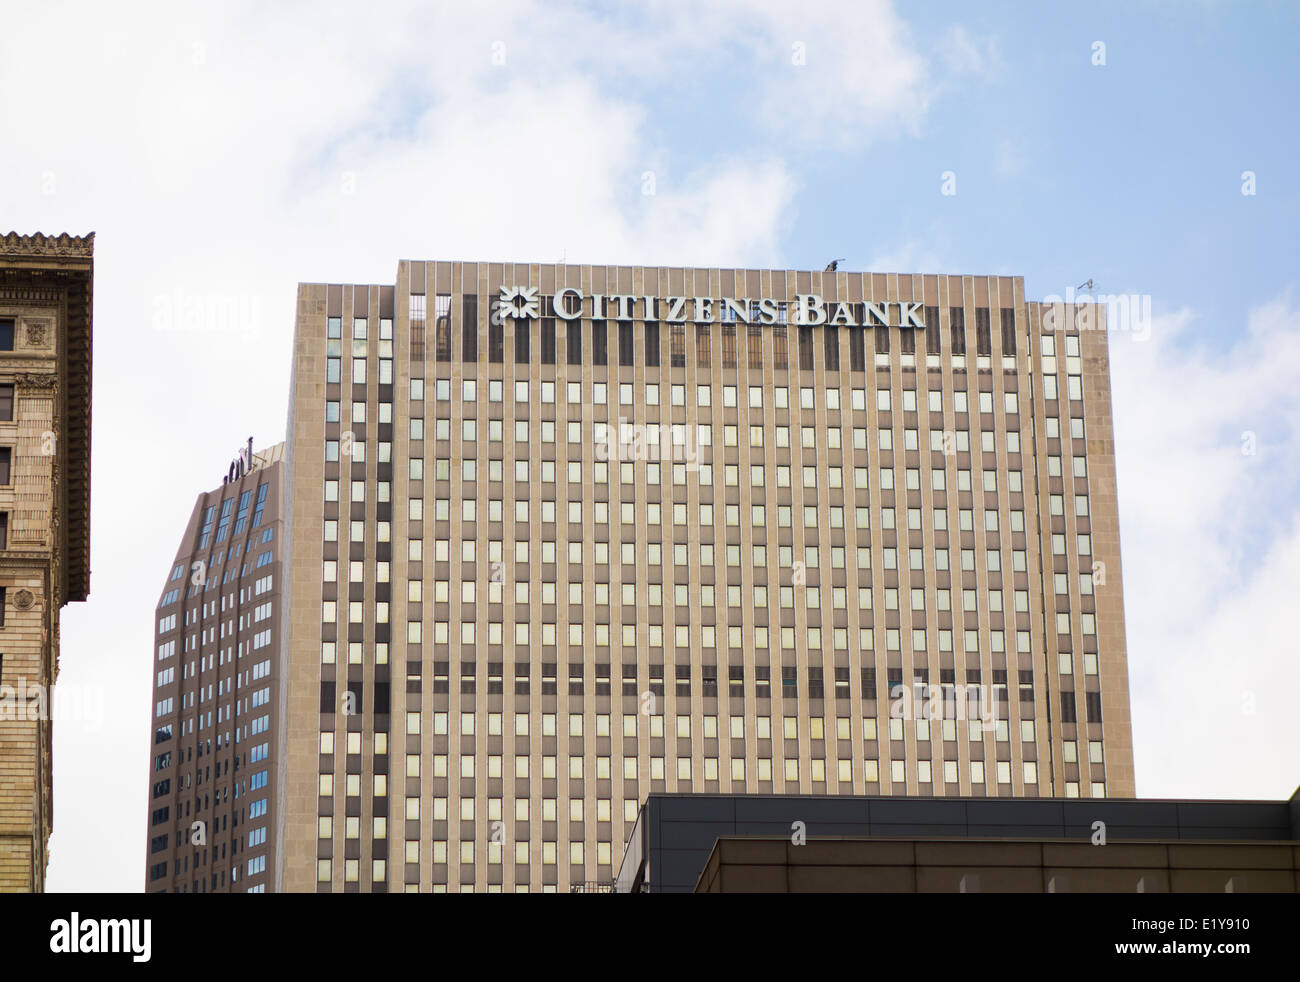 Citizens Bank building in Pittsburgh PA Foto Stock